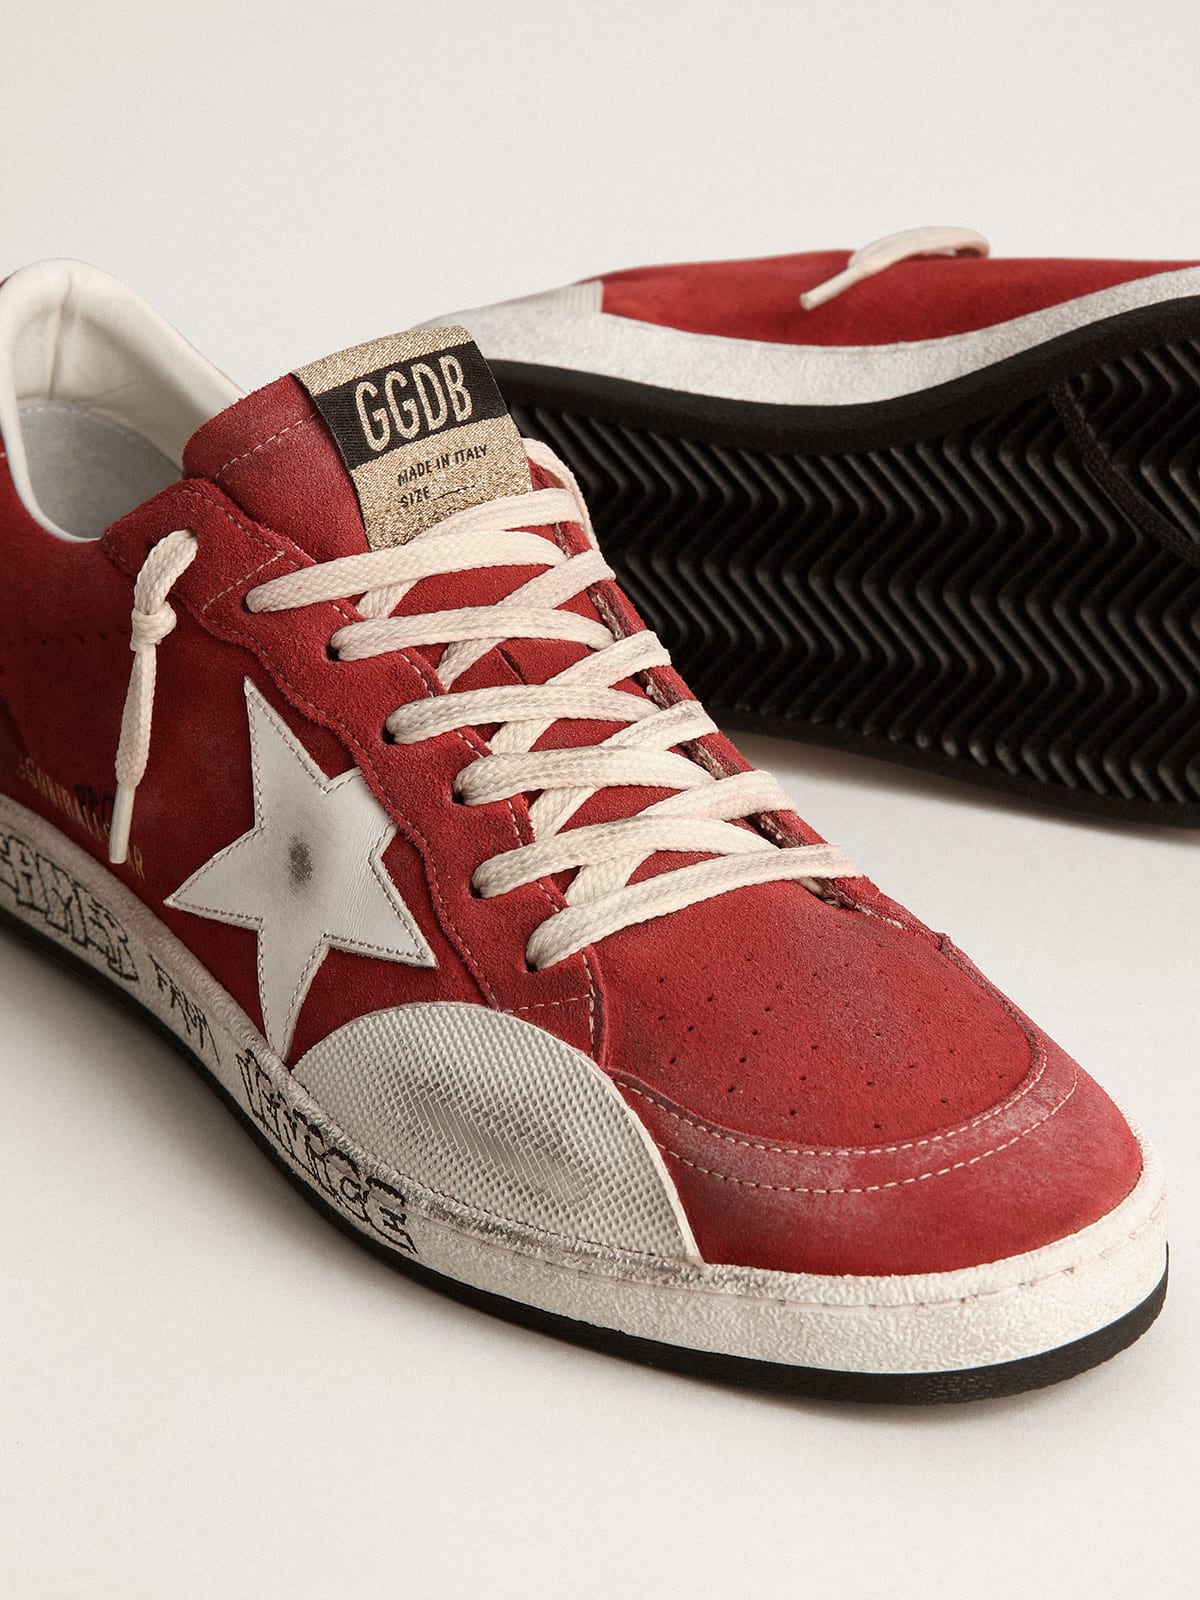 Golden Goose - Ball Star Pro women’s sneakers in red suede with knurled white rubber inserts in 